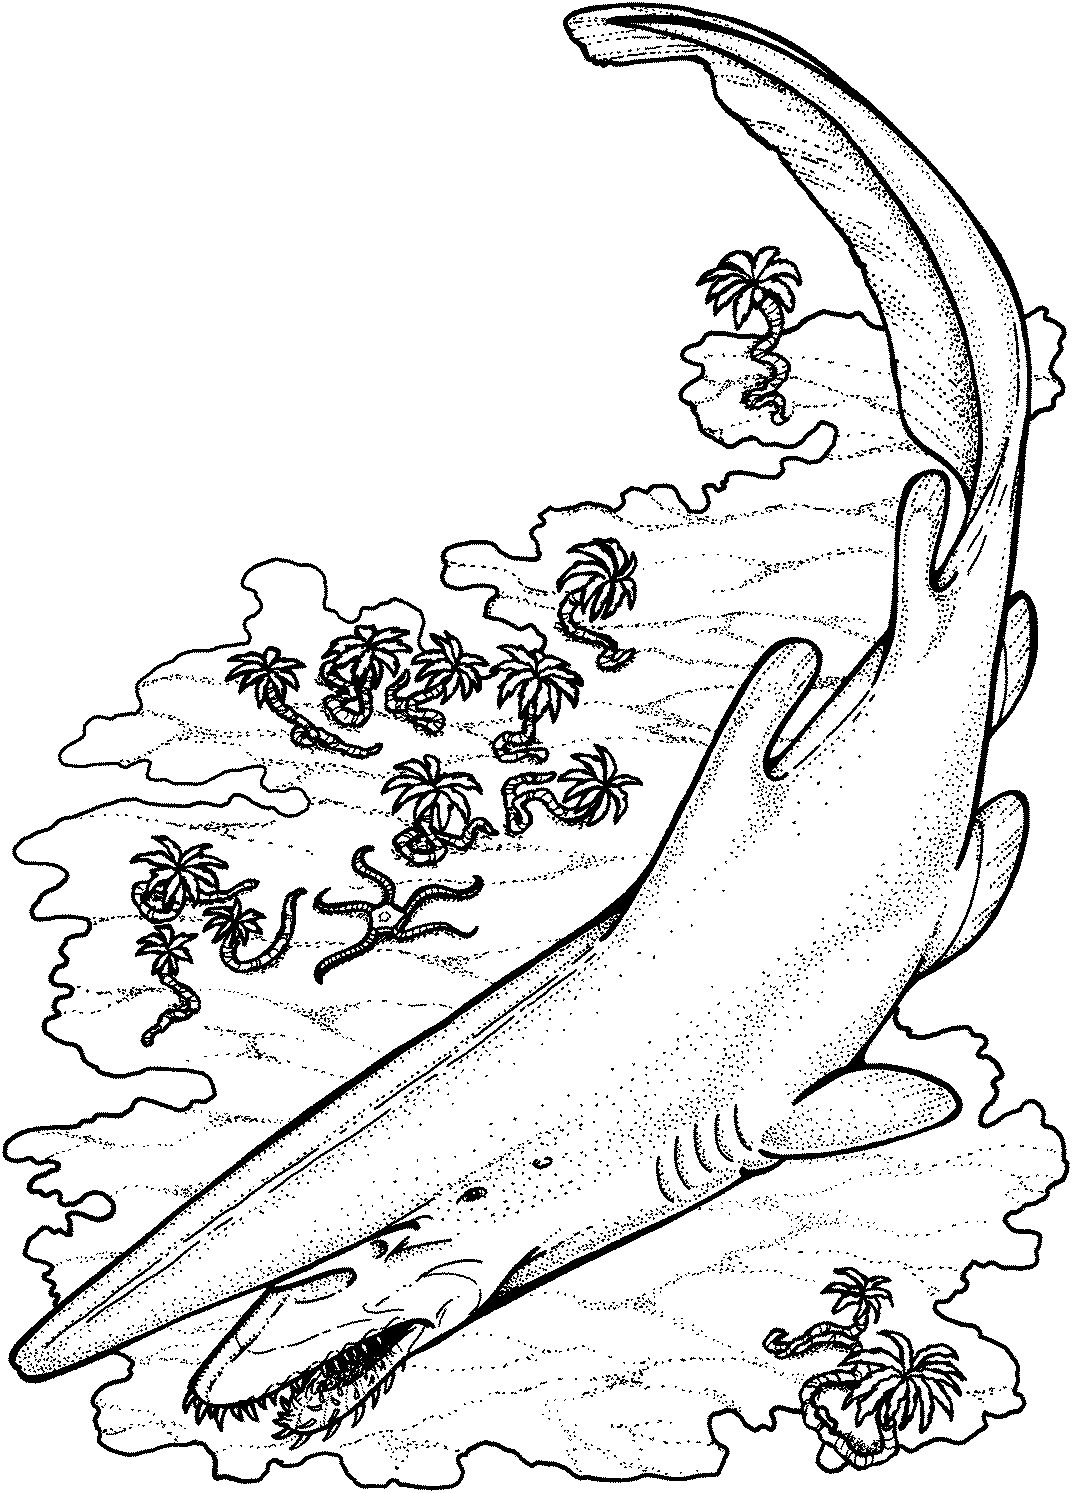 Goblin Shark Coloring Pages